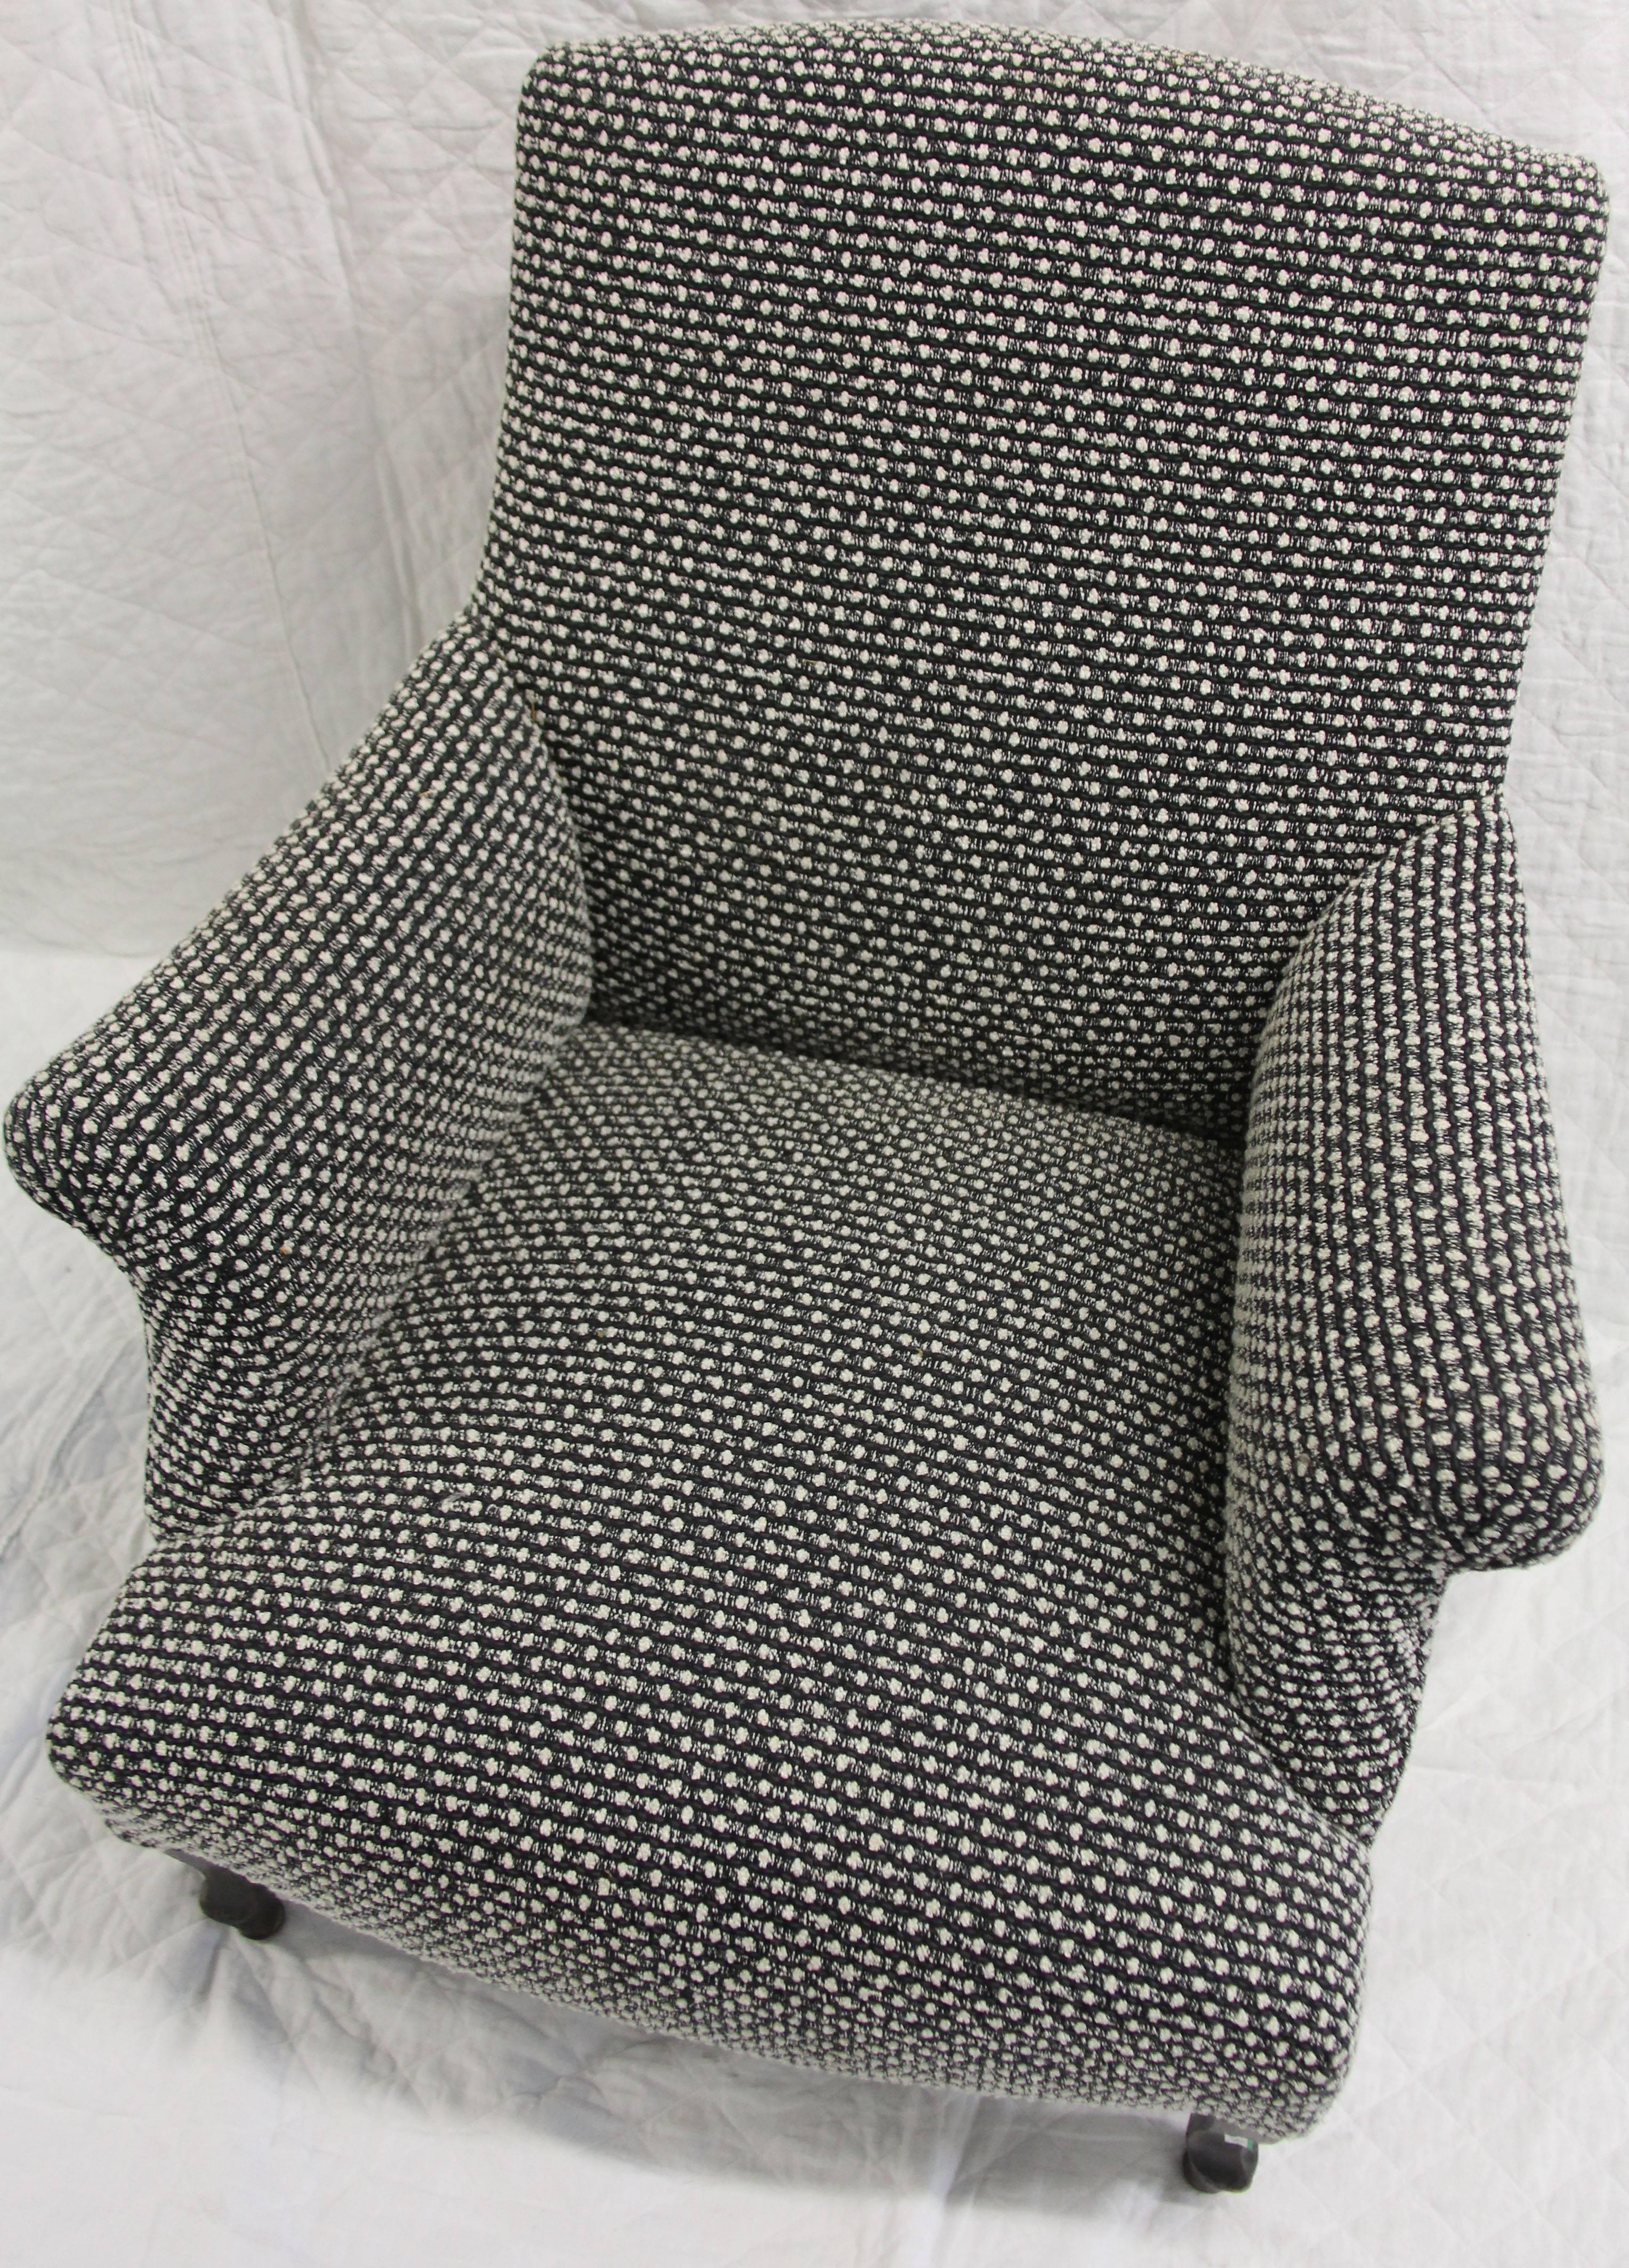 Late 19th century Classic French lounge chair in black and white wool fabric
Restored and upholstered in nubby black and white wool fabric
Original legs 








Dimensions: 35